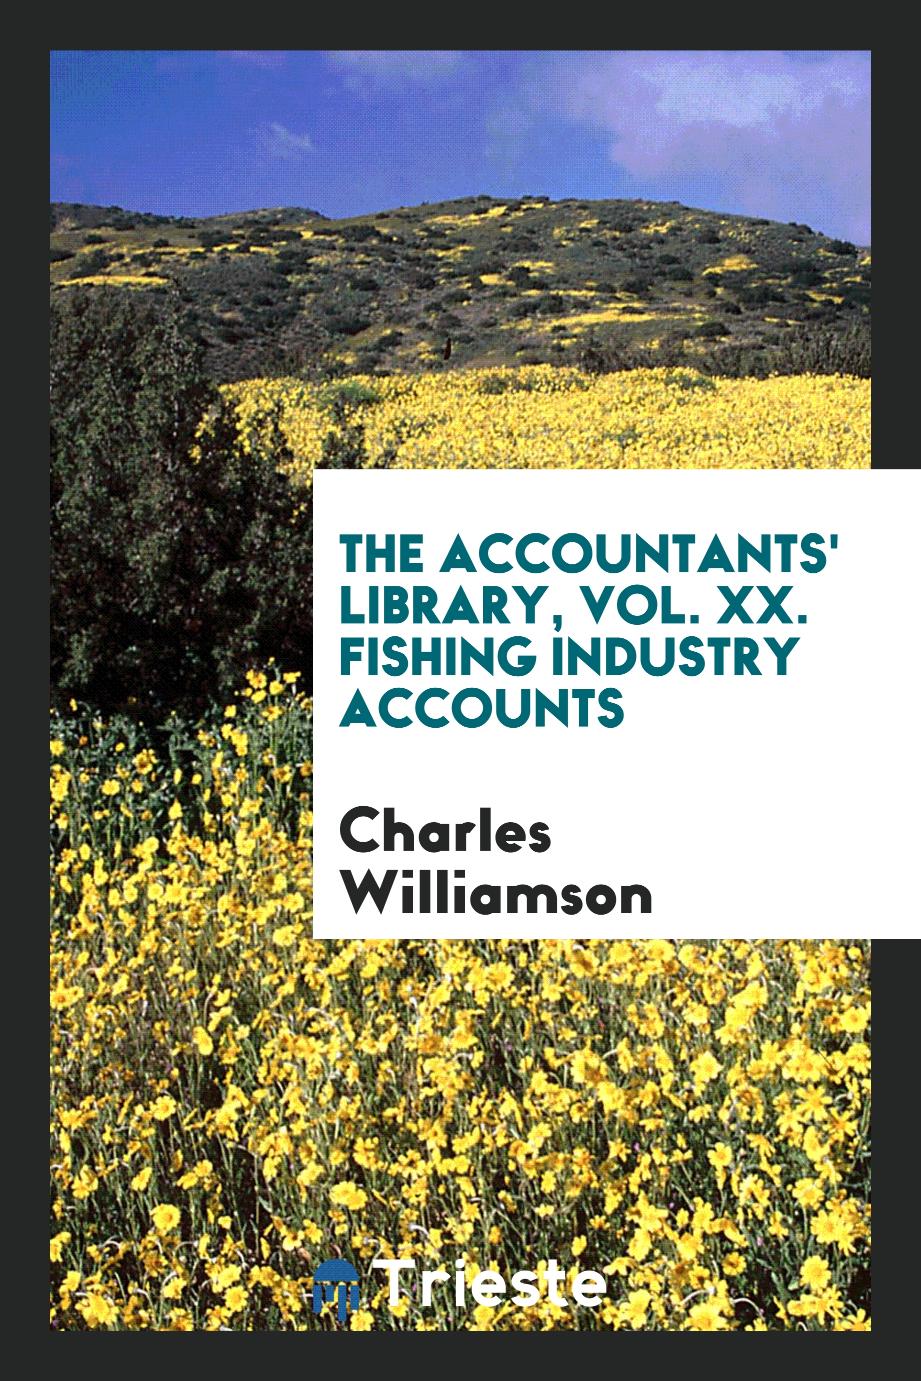 The Accountants' Library, Vol. XX. Fishing Industry Accounts